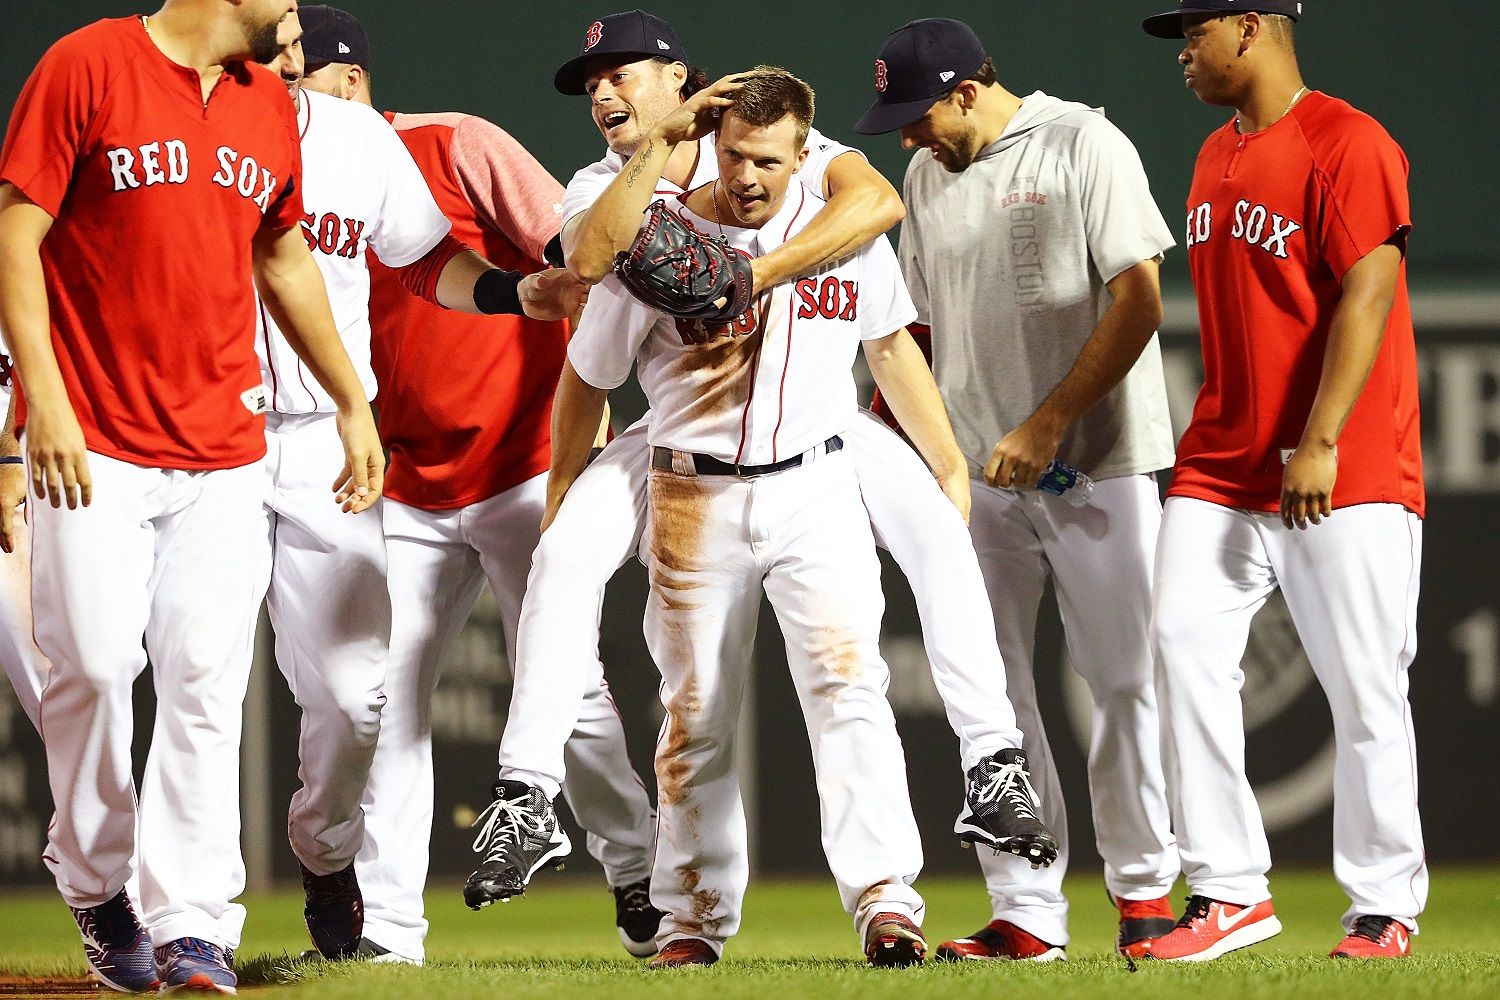 BOSTON, MA - AUGUST 06:  Tony Renda #38 of the Boston Red Sox who scored the game-winning run gives a piggy back ride to Joe Kelly #56 of the Boston Red Sox after a victory over the New York Yankees at Fenway Park on August 6, 2018 in Boston, Massachusetts.  (Photo by Adam Glanzman/Getty Images)